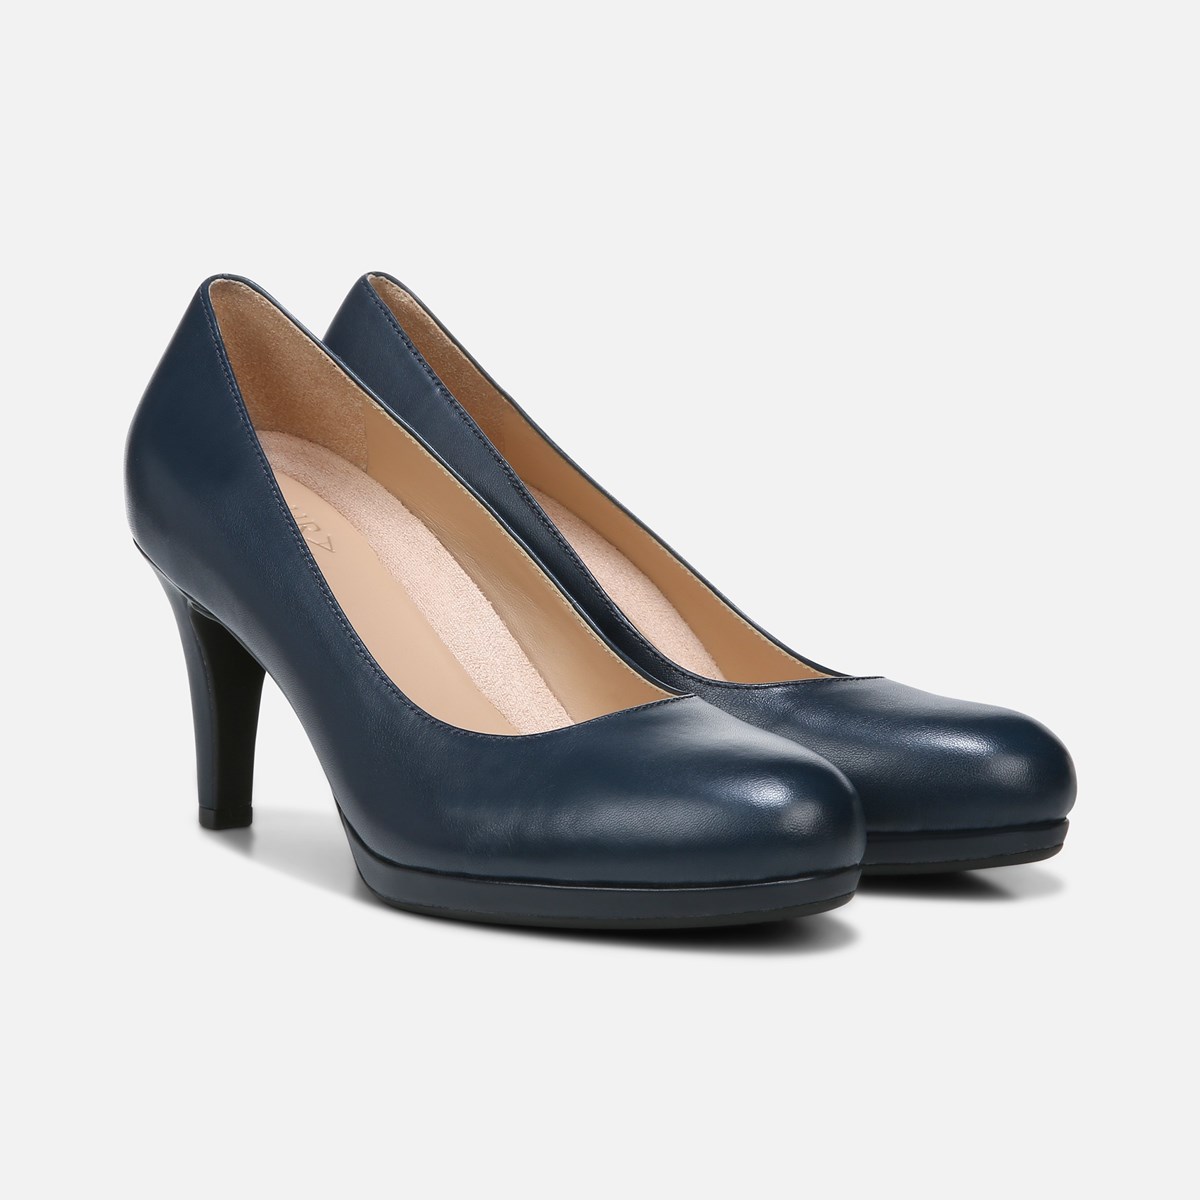 naturalizer navy shoes